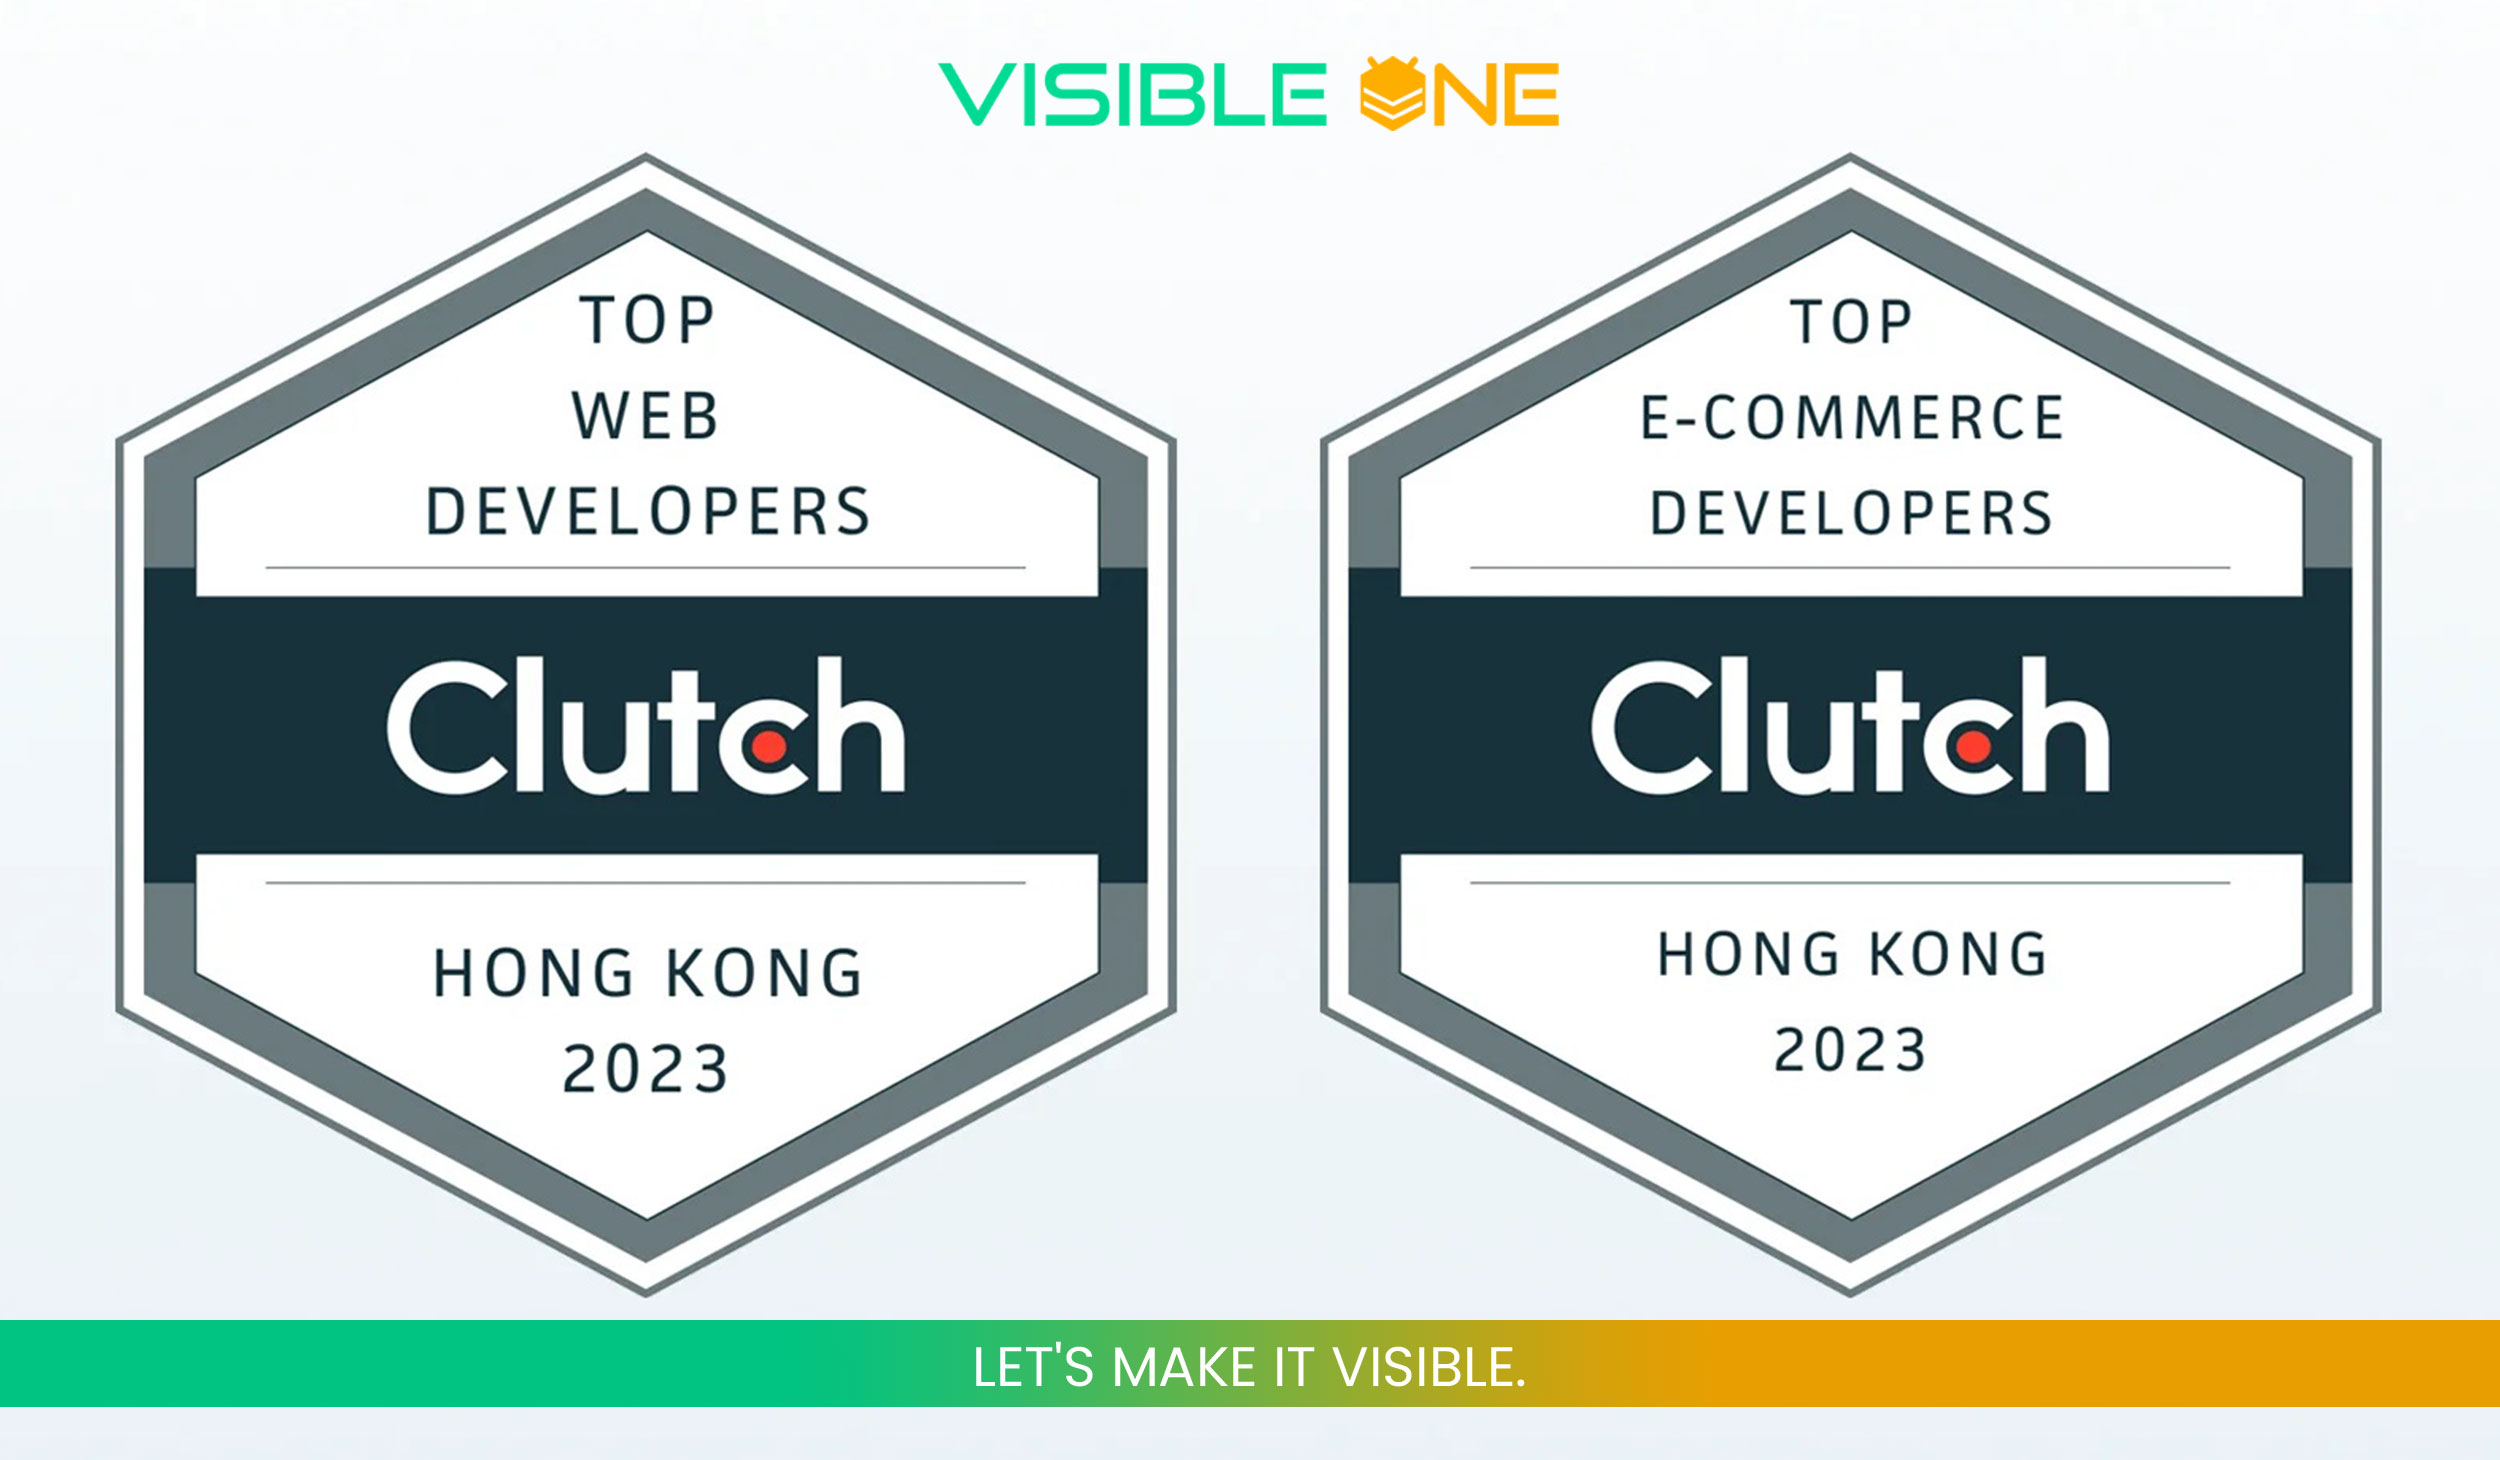 Clutch Named Visible One as Hong Kong's B2B Leader for 2022